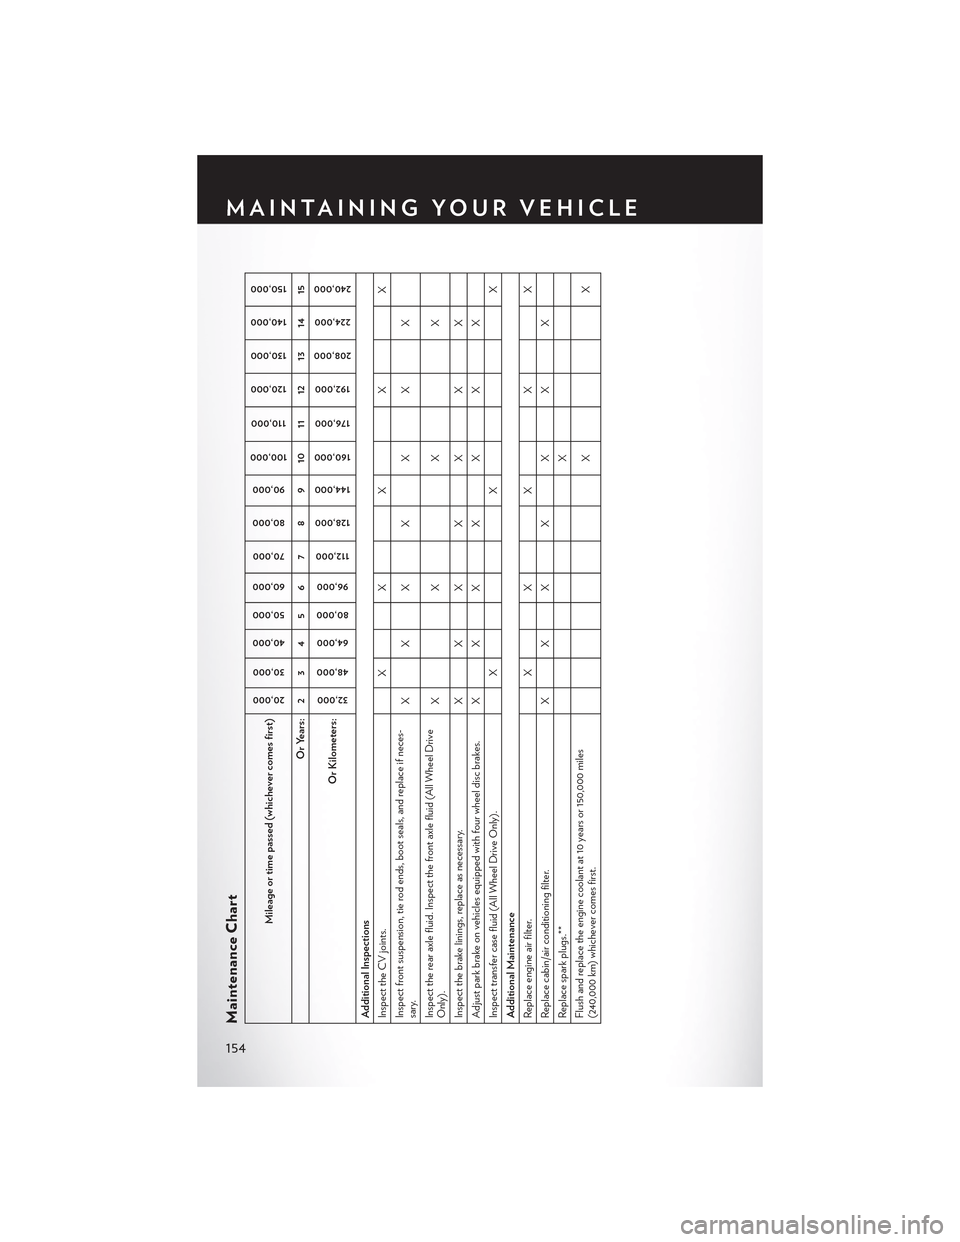 CHRYSLER 300 2015 2.G User Guide Maintenance Chart
Mileage or time passed (whichever comes first)
20,000
30,000
40,000
50,000
60,000
70,000
80,000
90,000
100,000
110,000
120,000
130,000
140,000
150,000
Or Years: 2 3 4 5 6 7 8 9 10 11